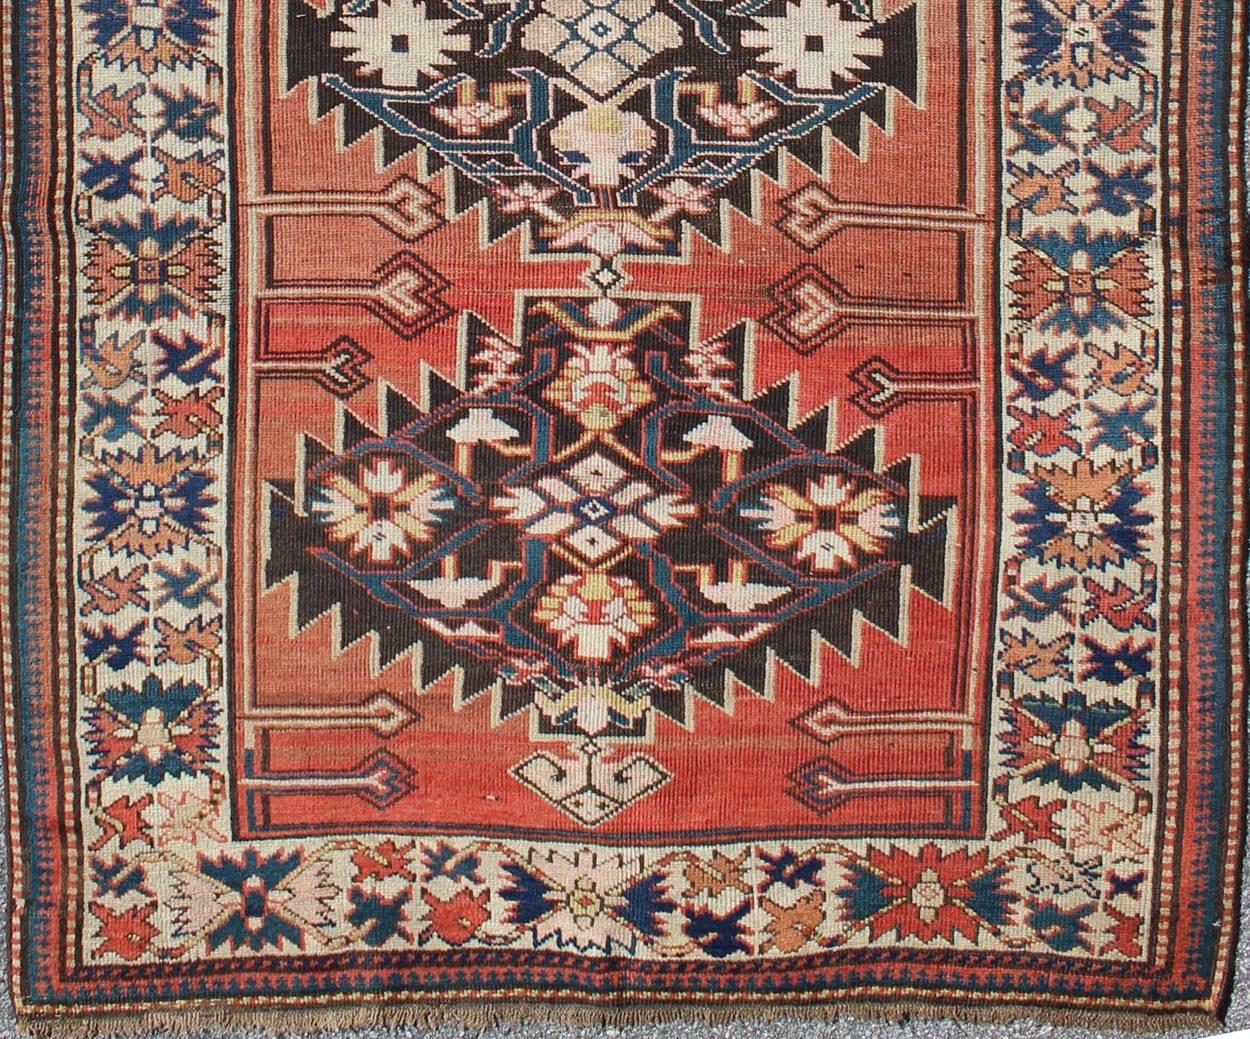 An antique southwest Caucasian Kazak rug with four complete latch hook or animal head style medallions, on an abrashed terracotta color field. Three borders in shades of navy blue, ivory and mid blue frame the filed. 
Measures: 4'3 x 8'10.
List